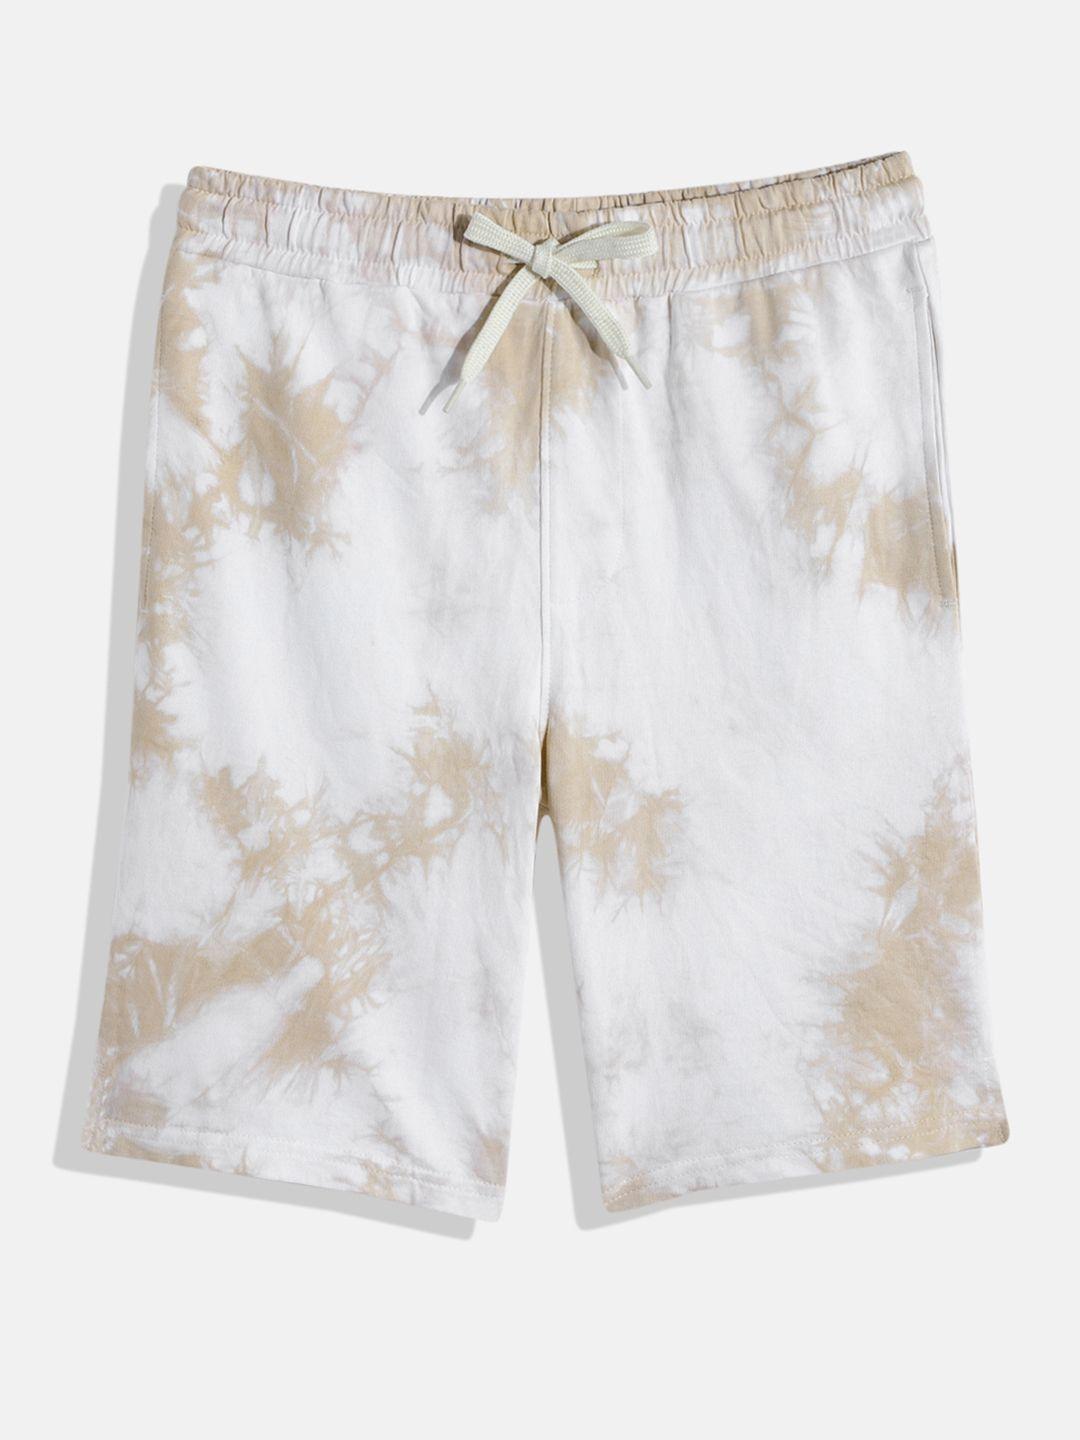 m&h juniors boys white and khaki abstract printed pure cotton shorts